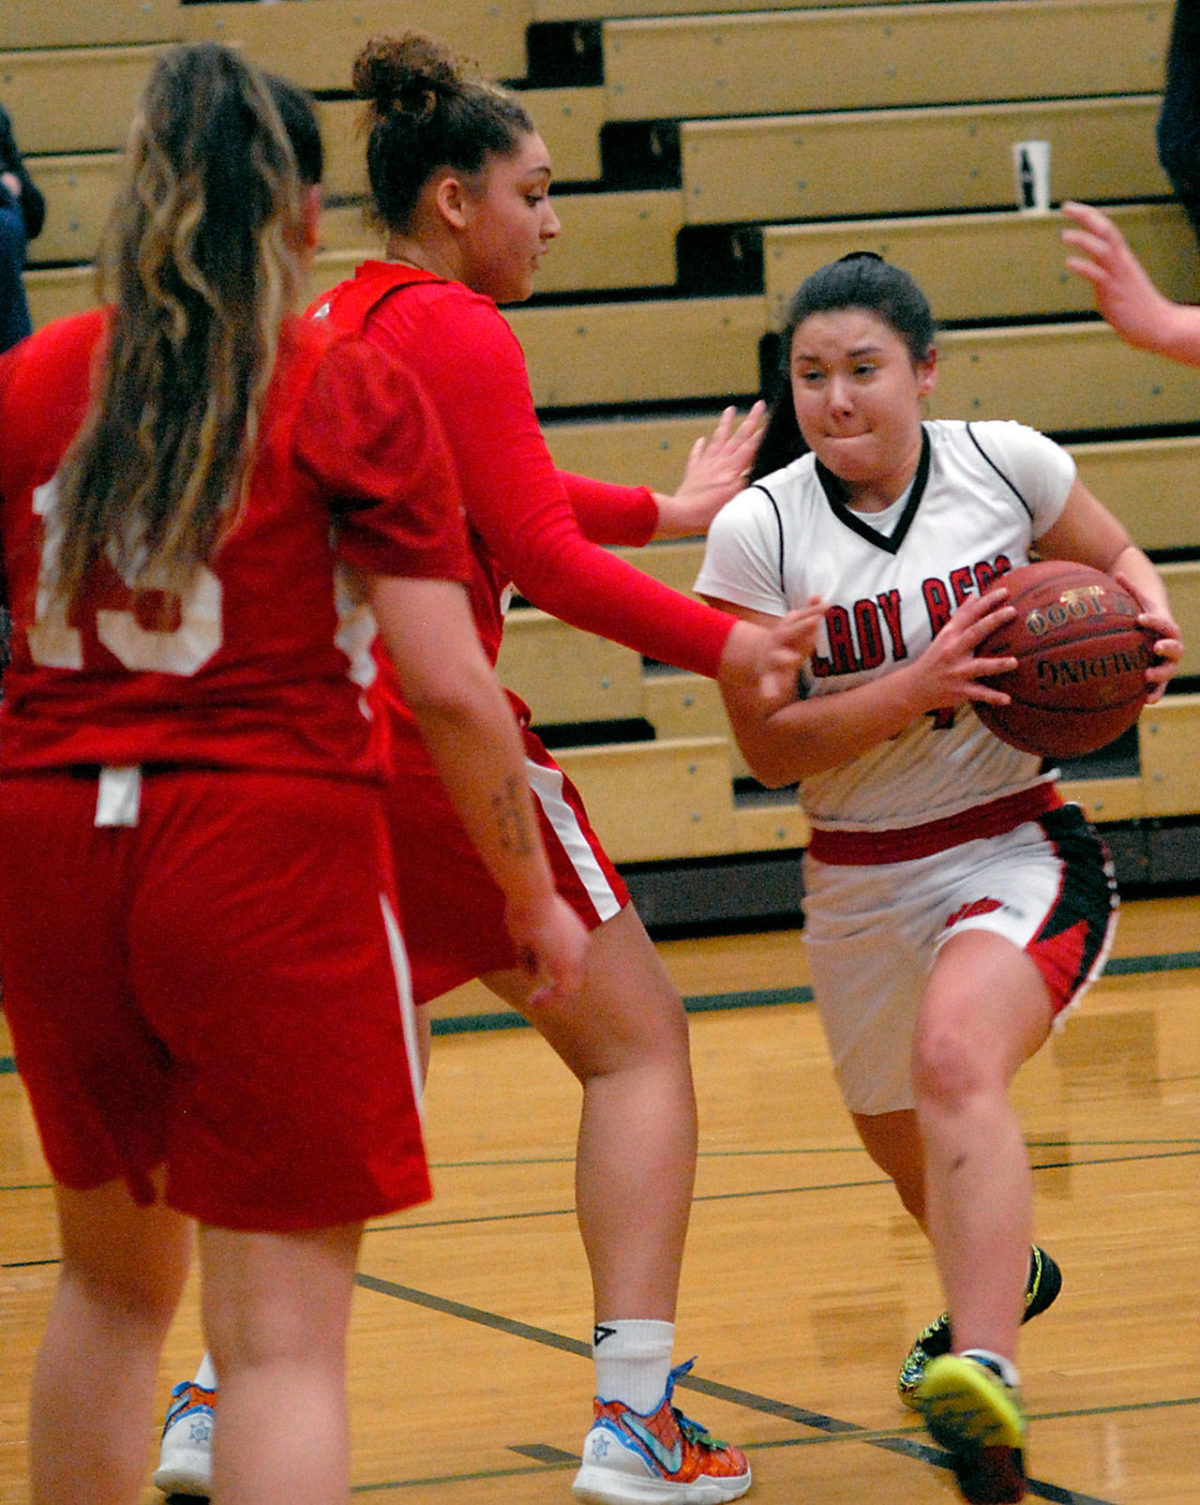 DISTRICT BASKETBALL Neah Bay, Clallam Bay girls punch tickets to state